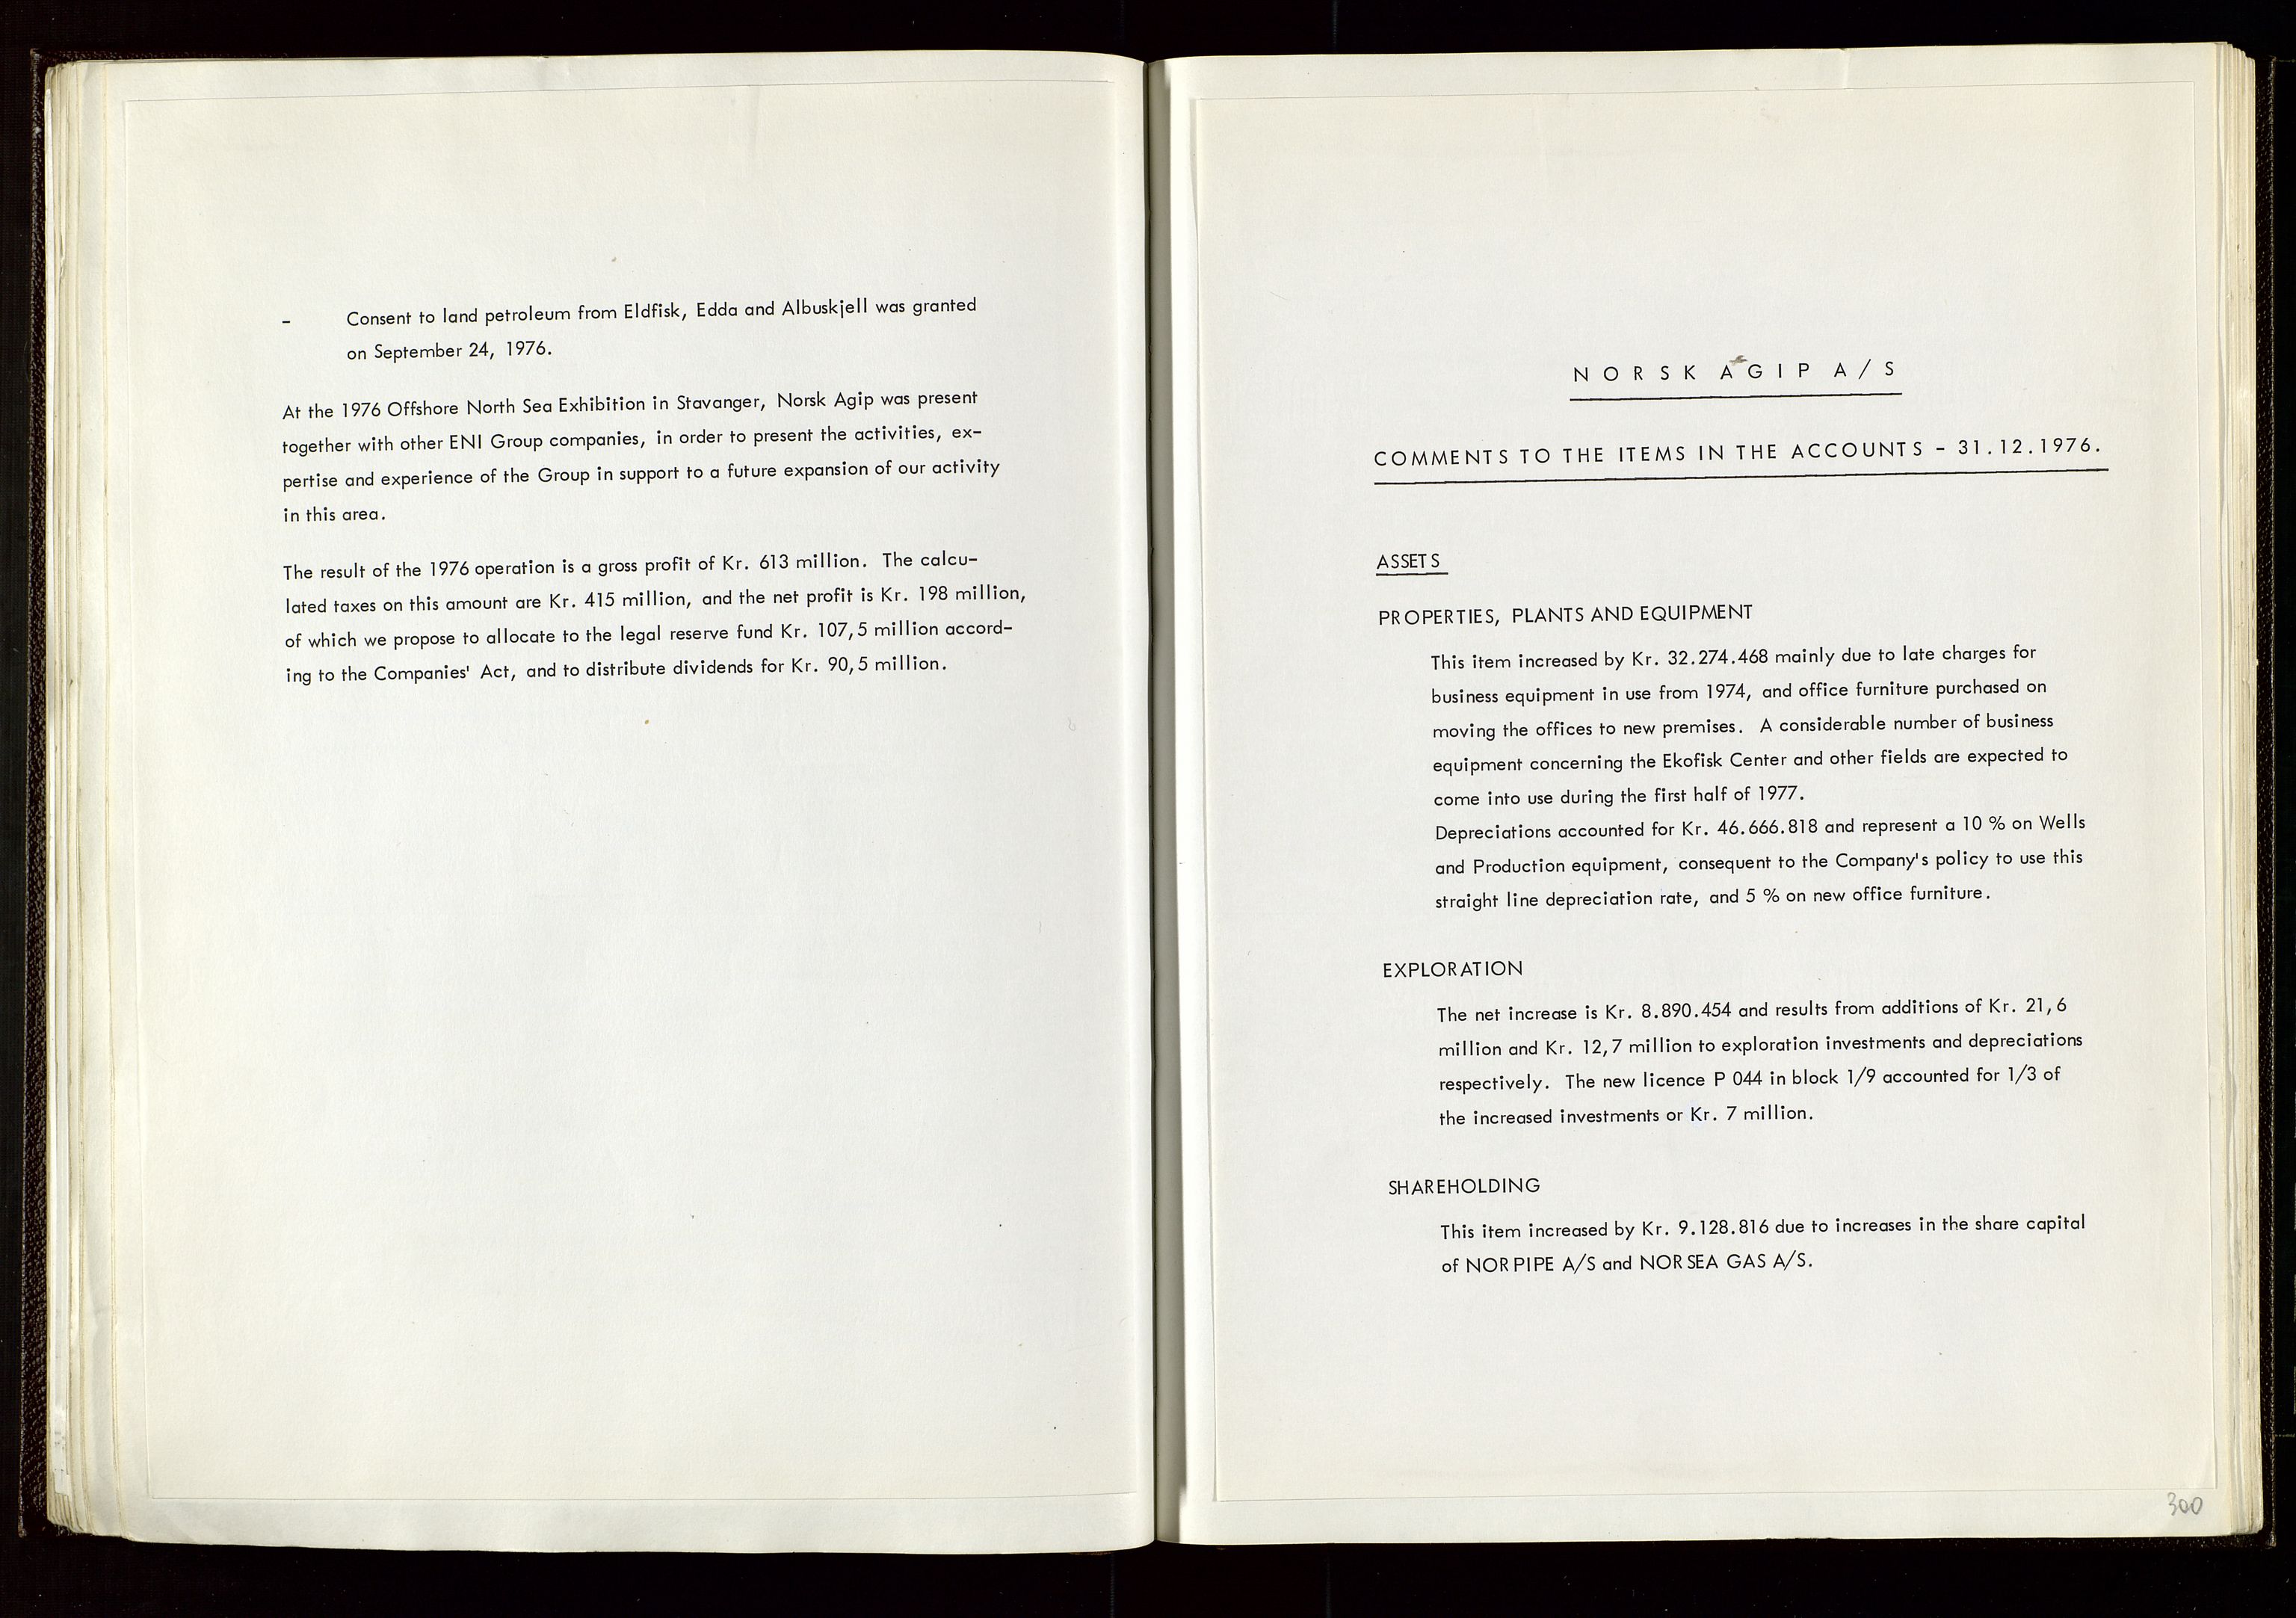 Pa 1583 - Norsk Agip AS, SAST/A-102138/A/Aa/L0002: General assembly and Board of Directors meeting minutes, 1972-1979, p. 299-300